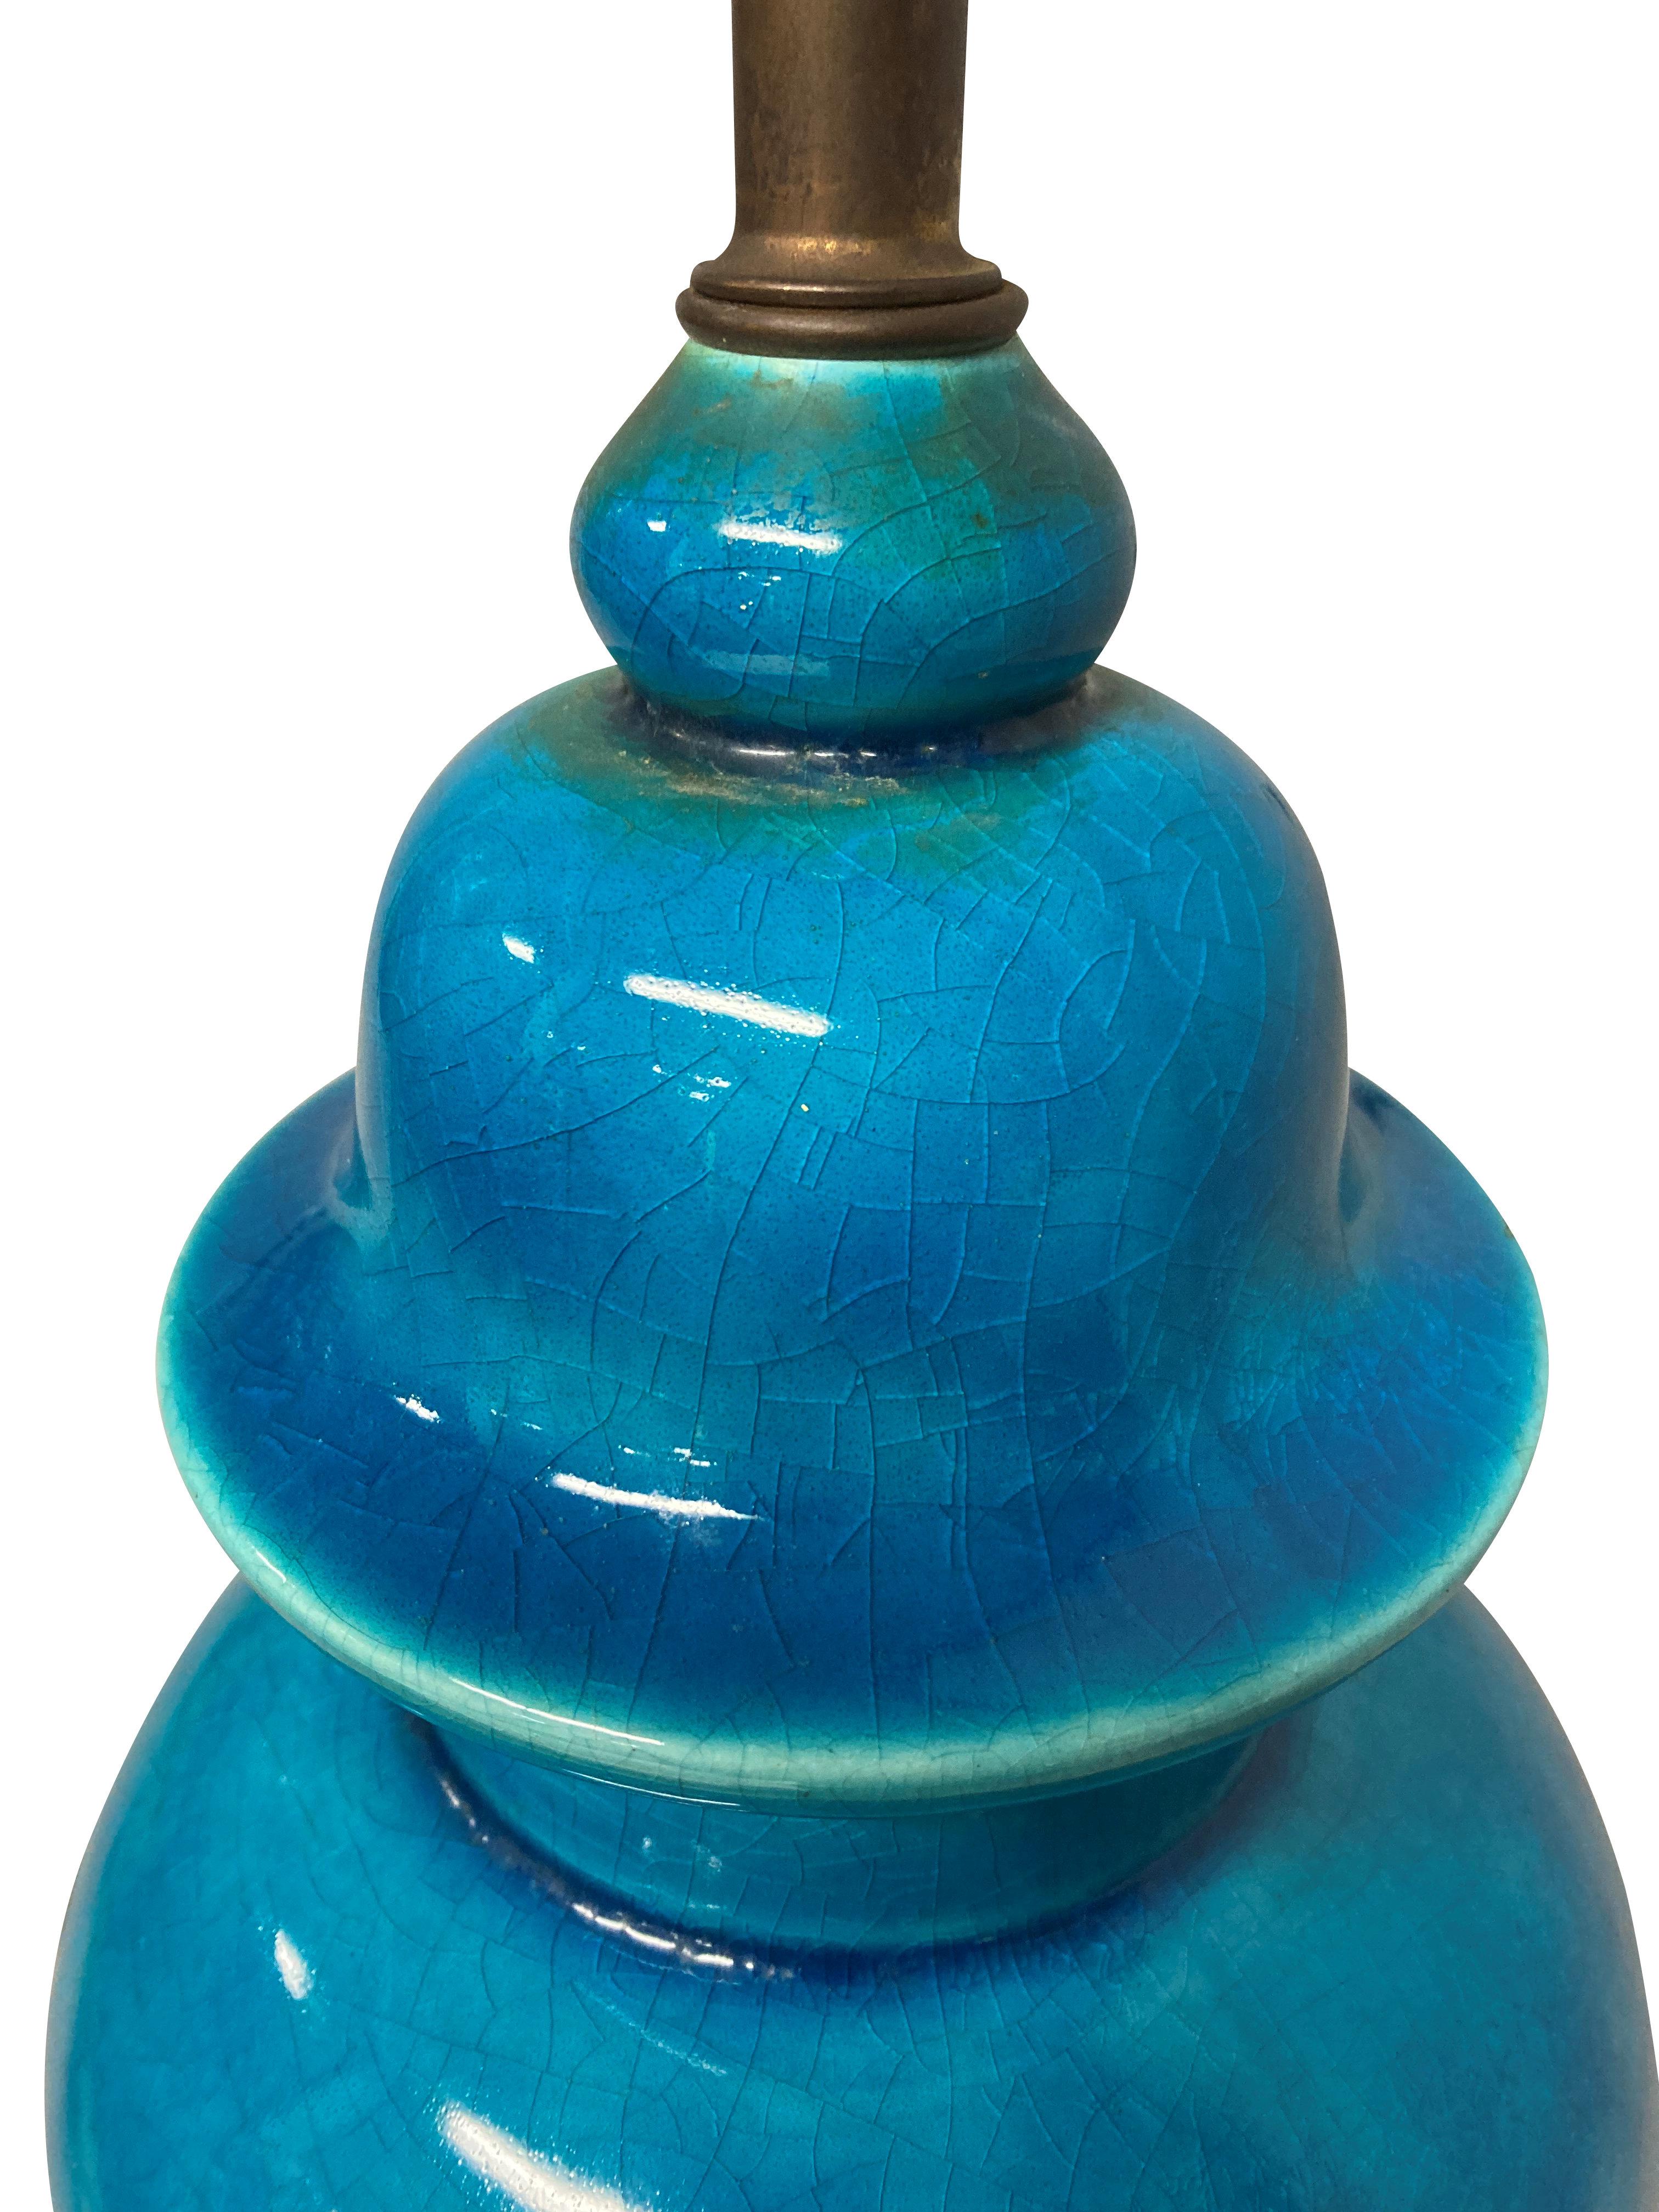 Mid-20th Century Chinese Turquoise Glazed Vase Lamp For Sale